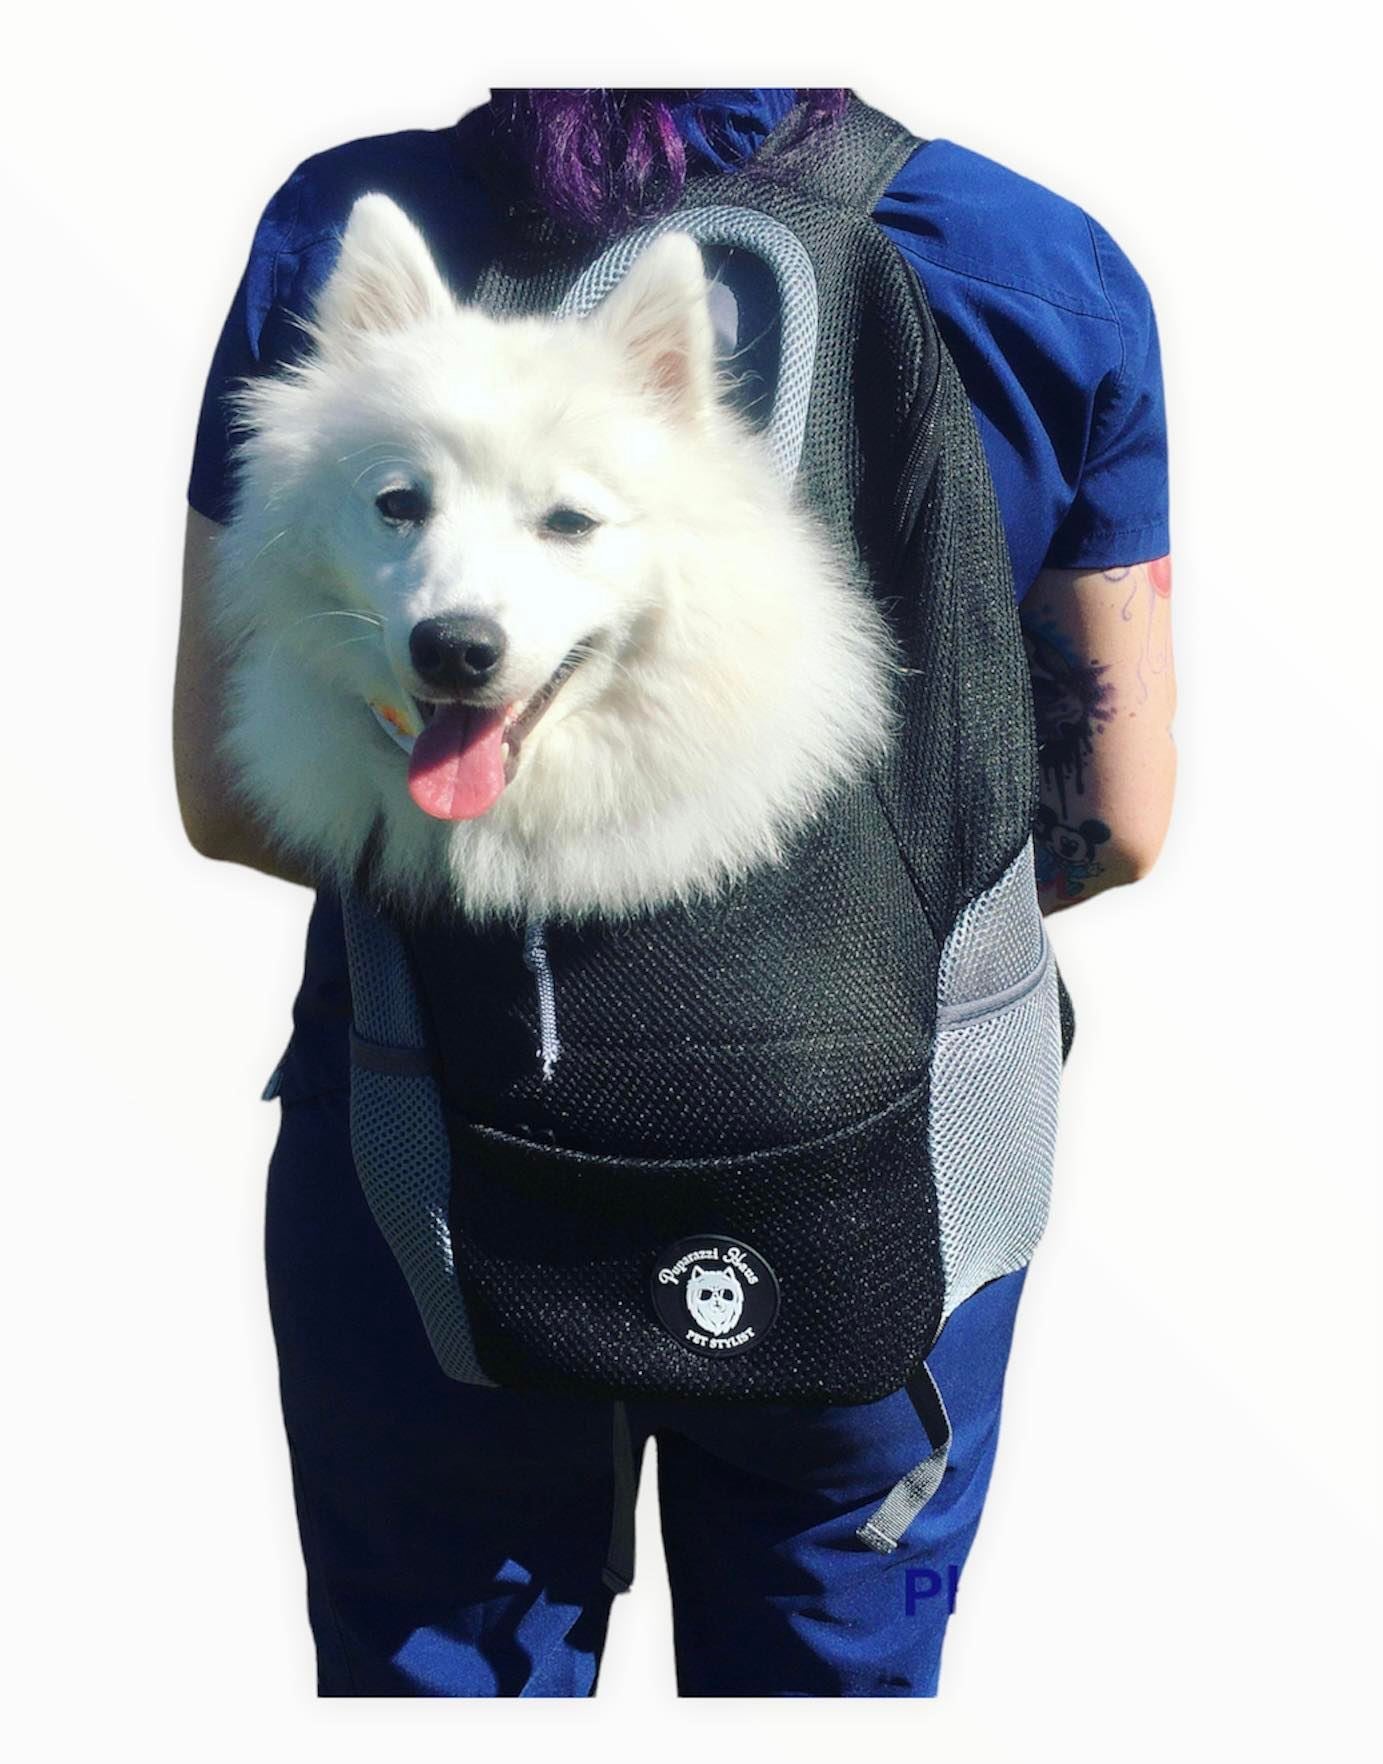 Dog travel bag, dog backpack, bags for dogs. Puparazzi Haus pet travel